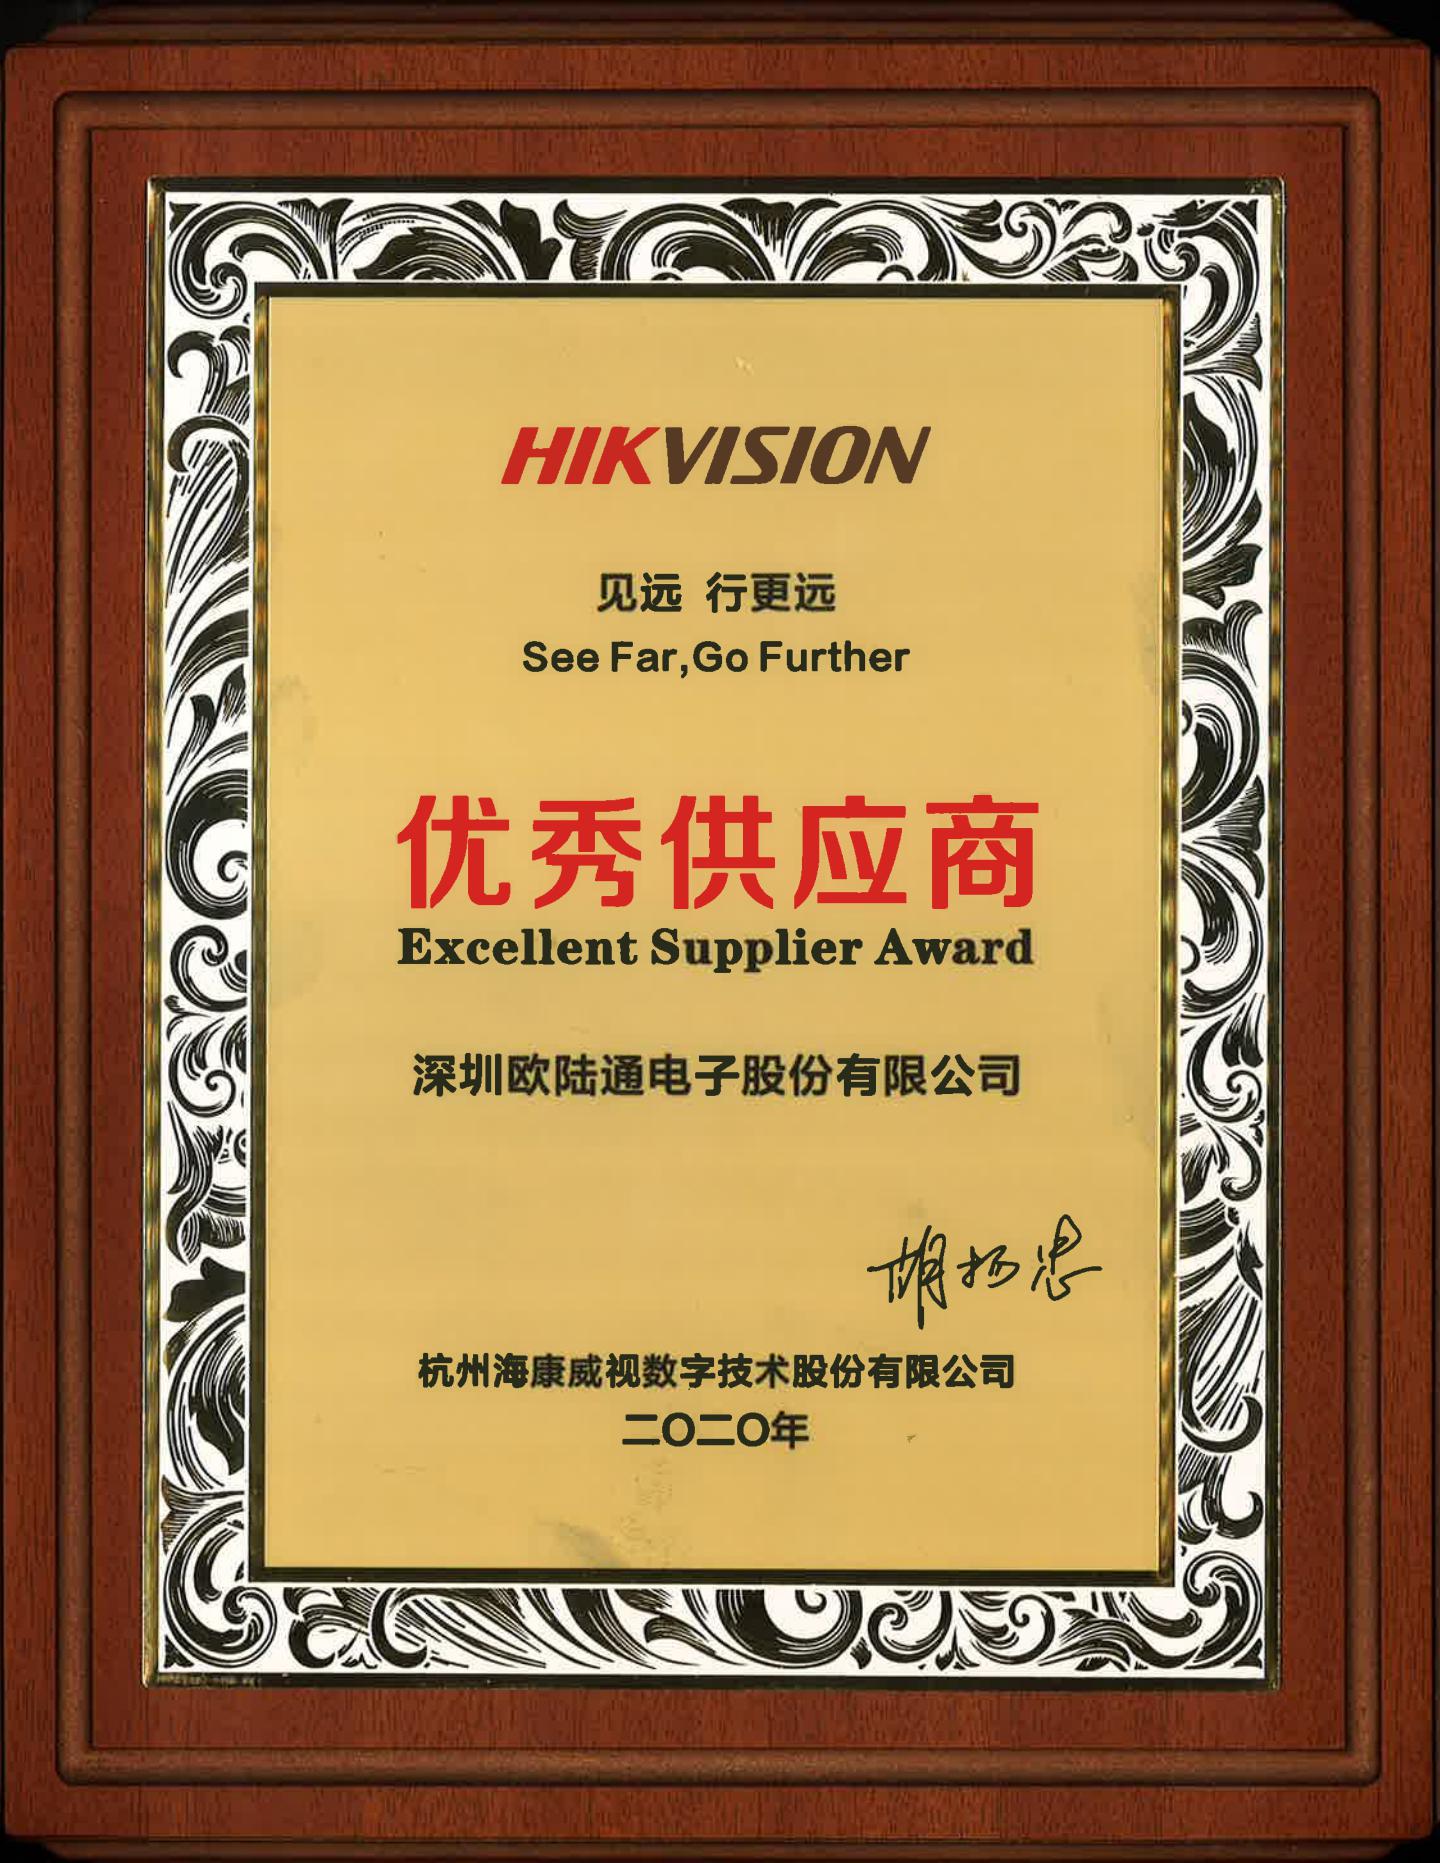 News | Honor was awarded "Excellent Supplier" by Hikvision in 2020